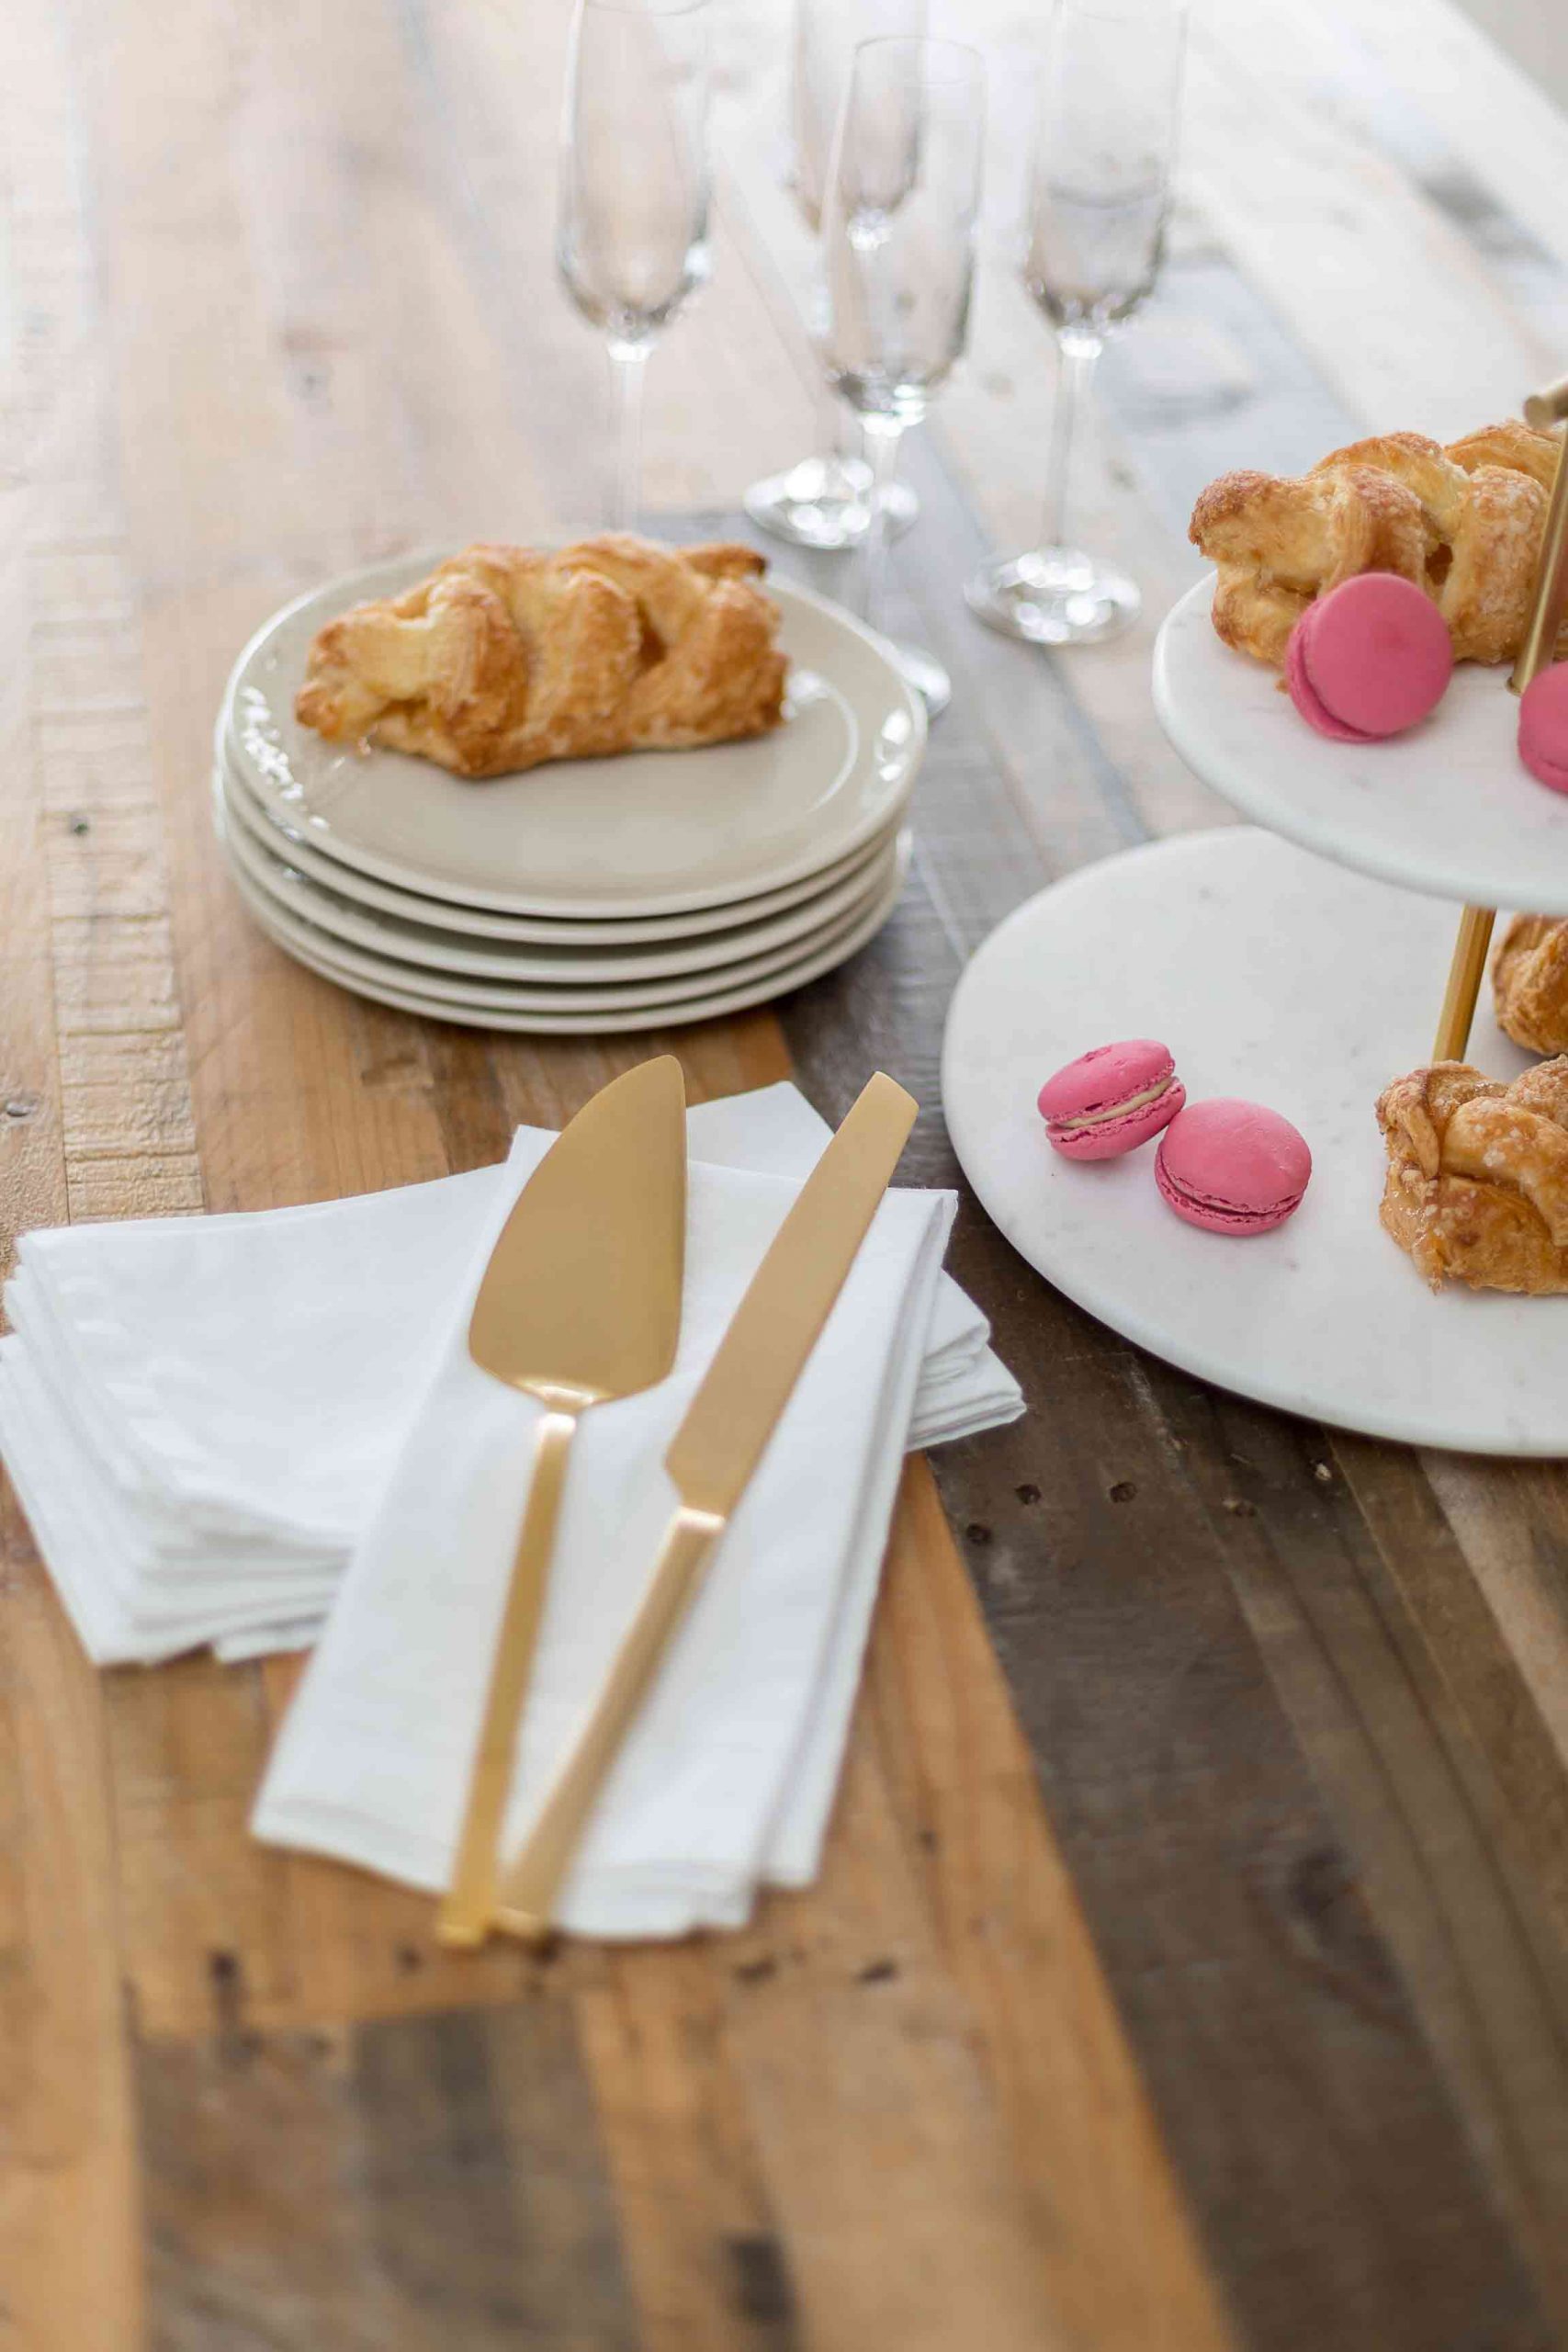 Rustic table with pastries and macaroons